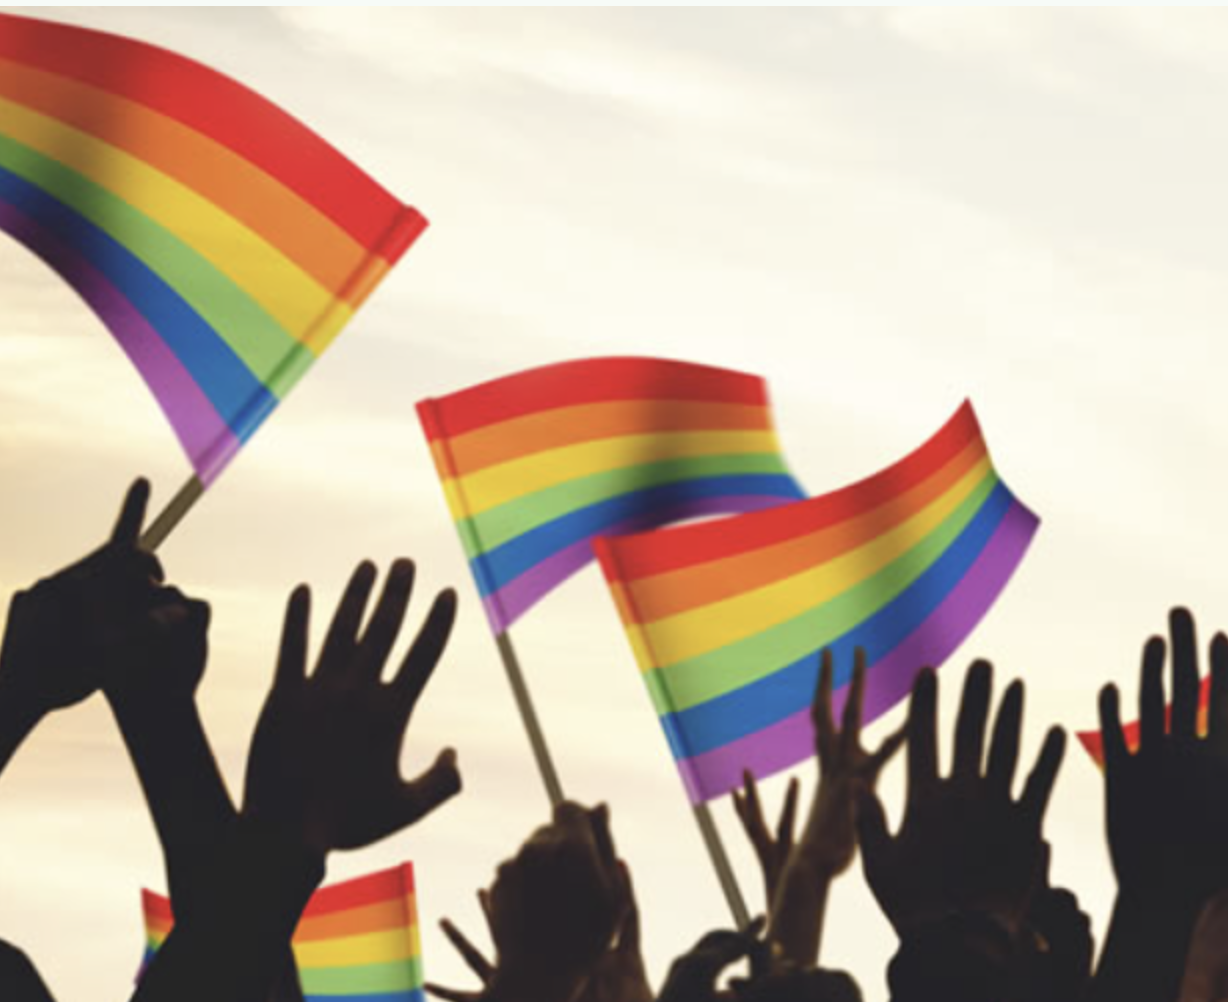 hands in the air waving rainbow flags